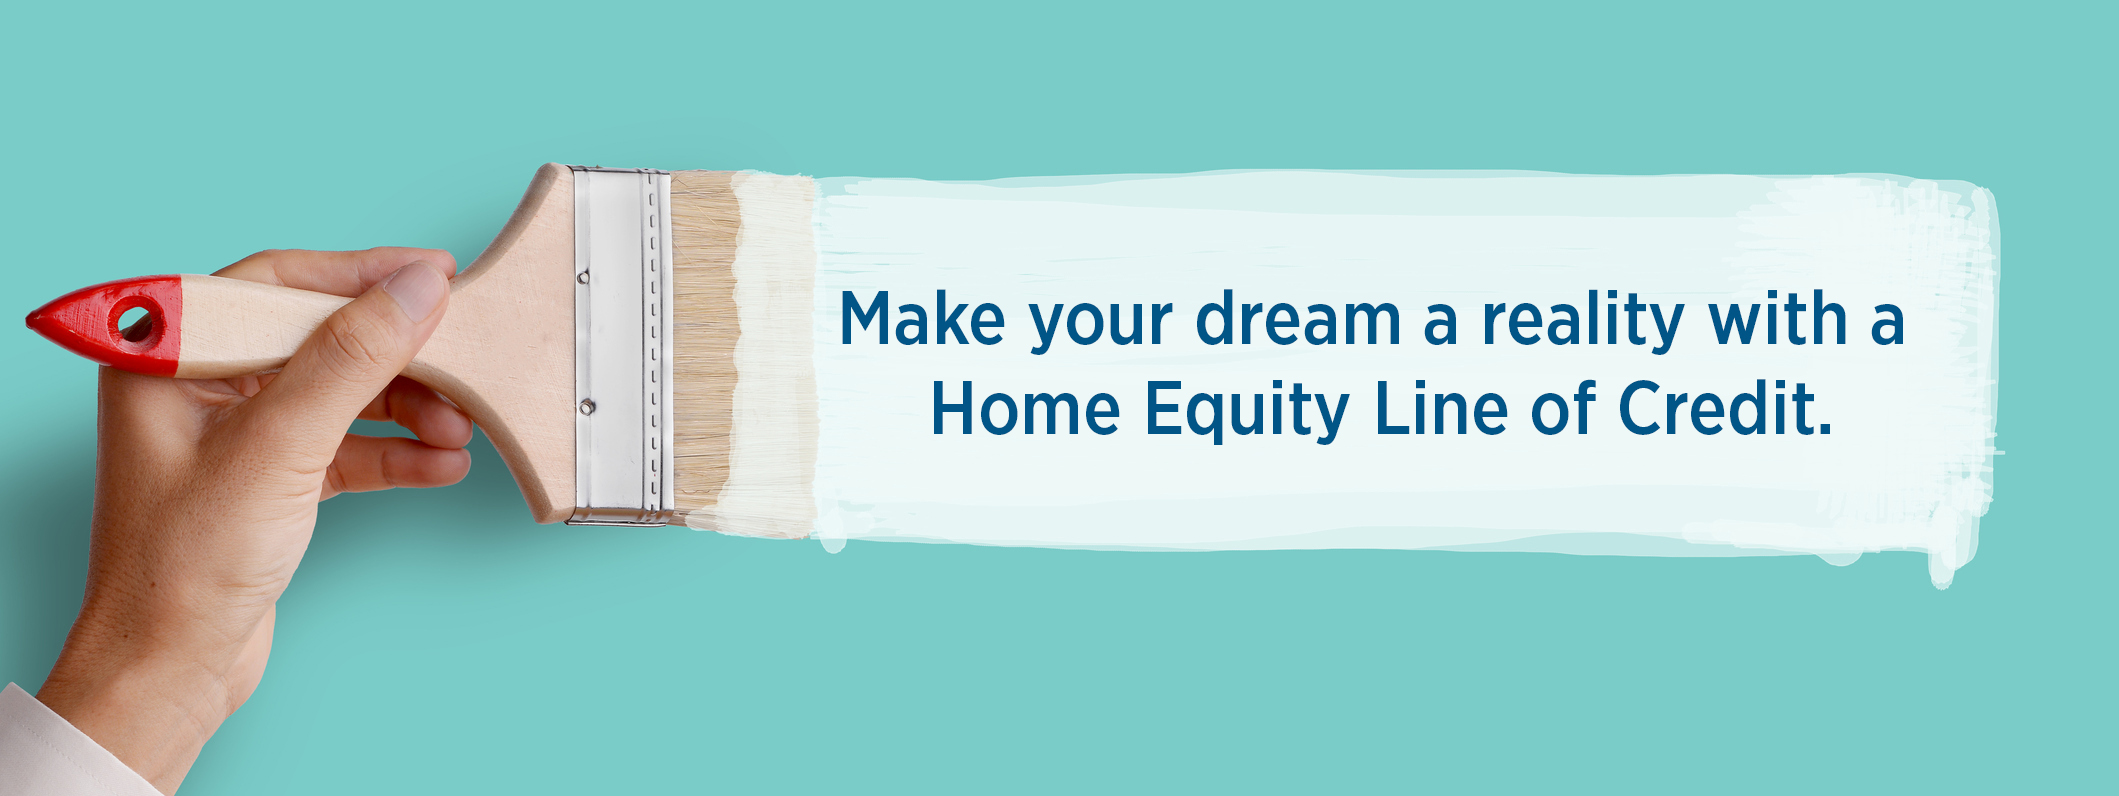 Home Equity Line of Credit › Camden National Bank